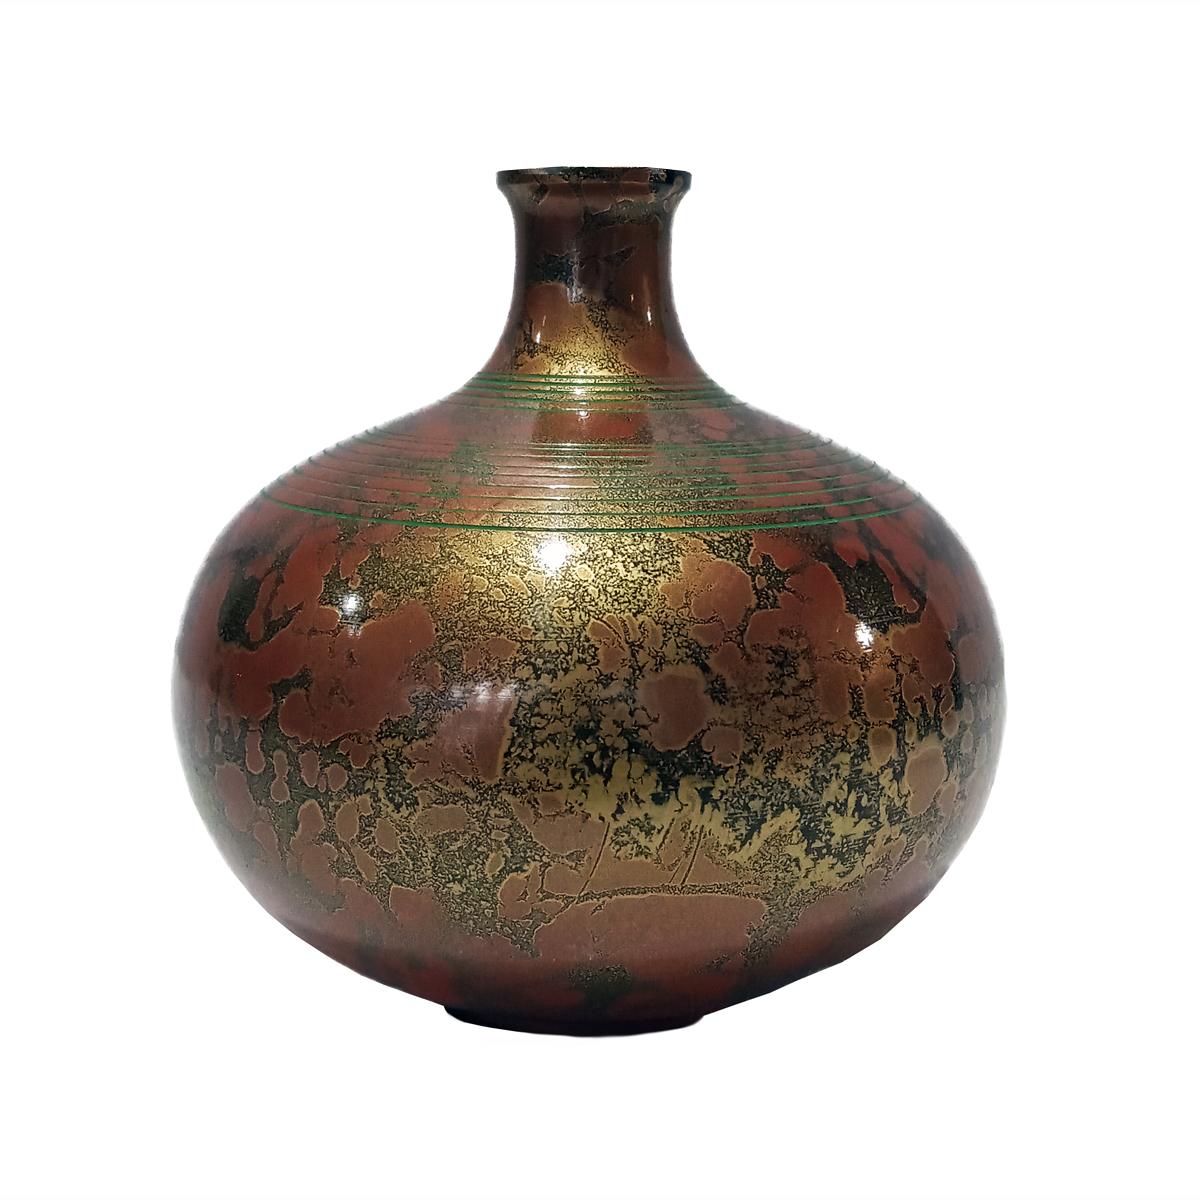 An Ikebana brass vase, hand-crafted in Japan, circa 1926. Showa Period. The finish is Murashido, a centuries-old technique that consists in dipping the cast brass in oil and smoke it with rice straw, which gives the vase that mottled, red swirl